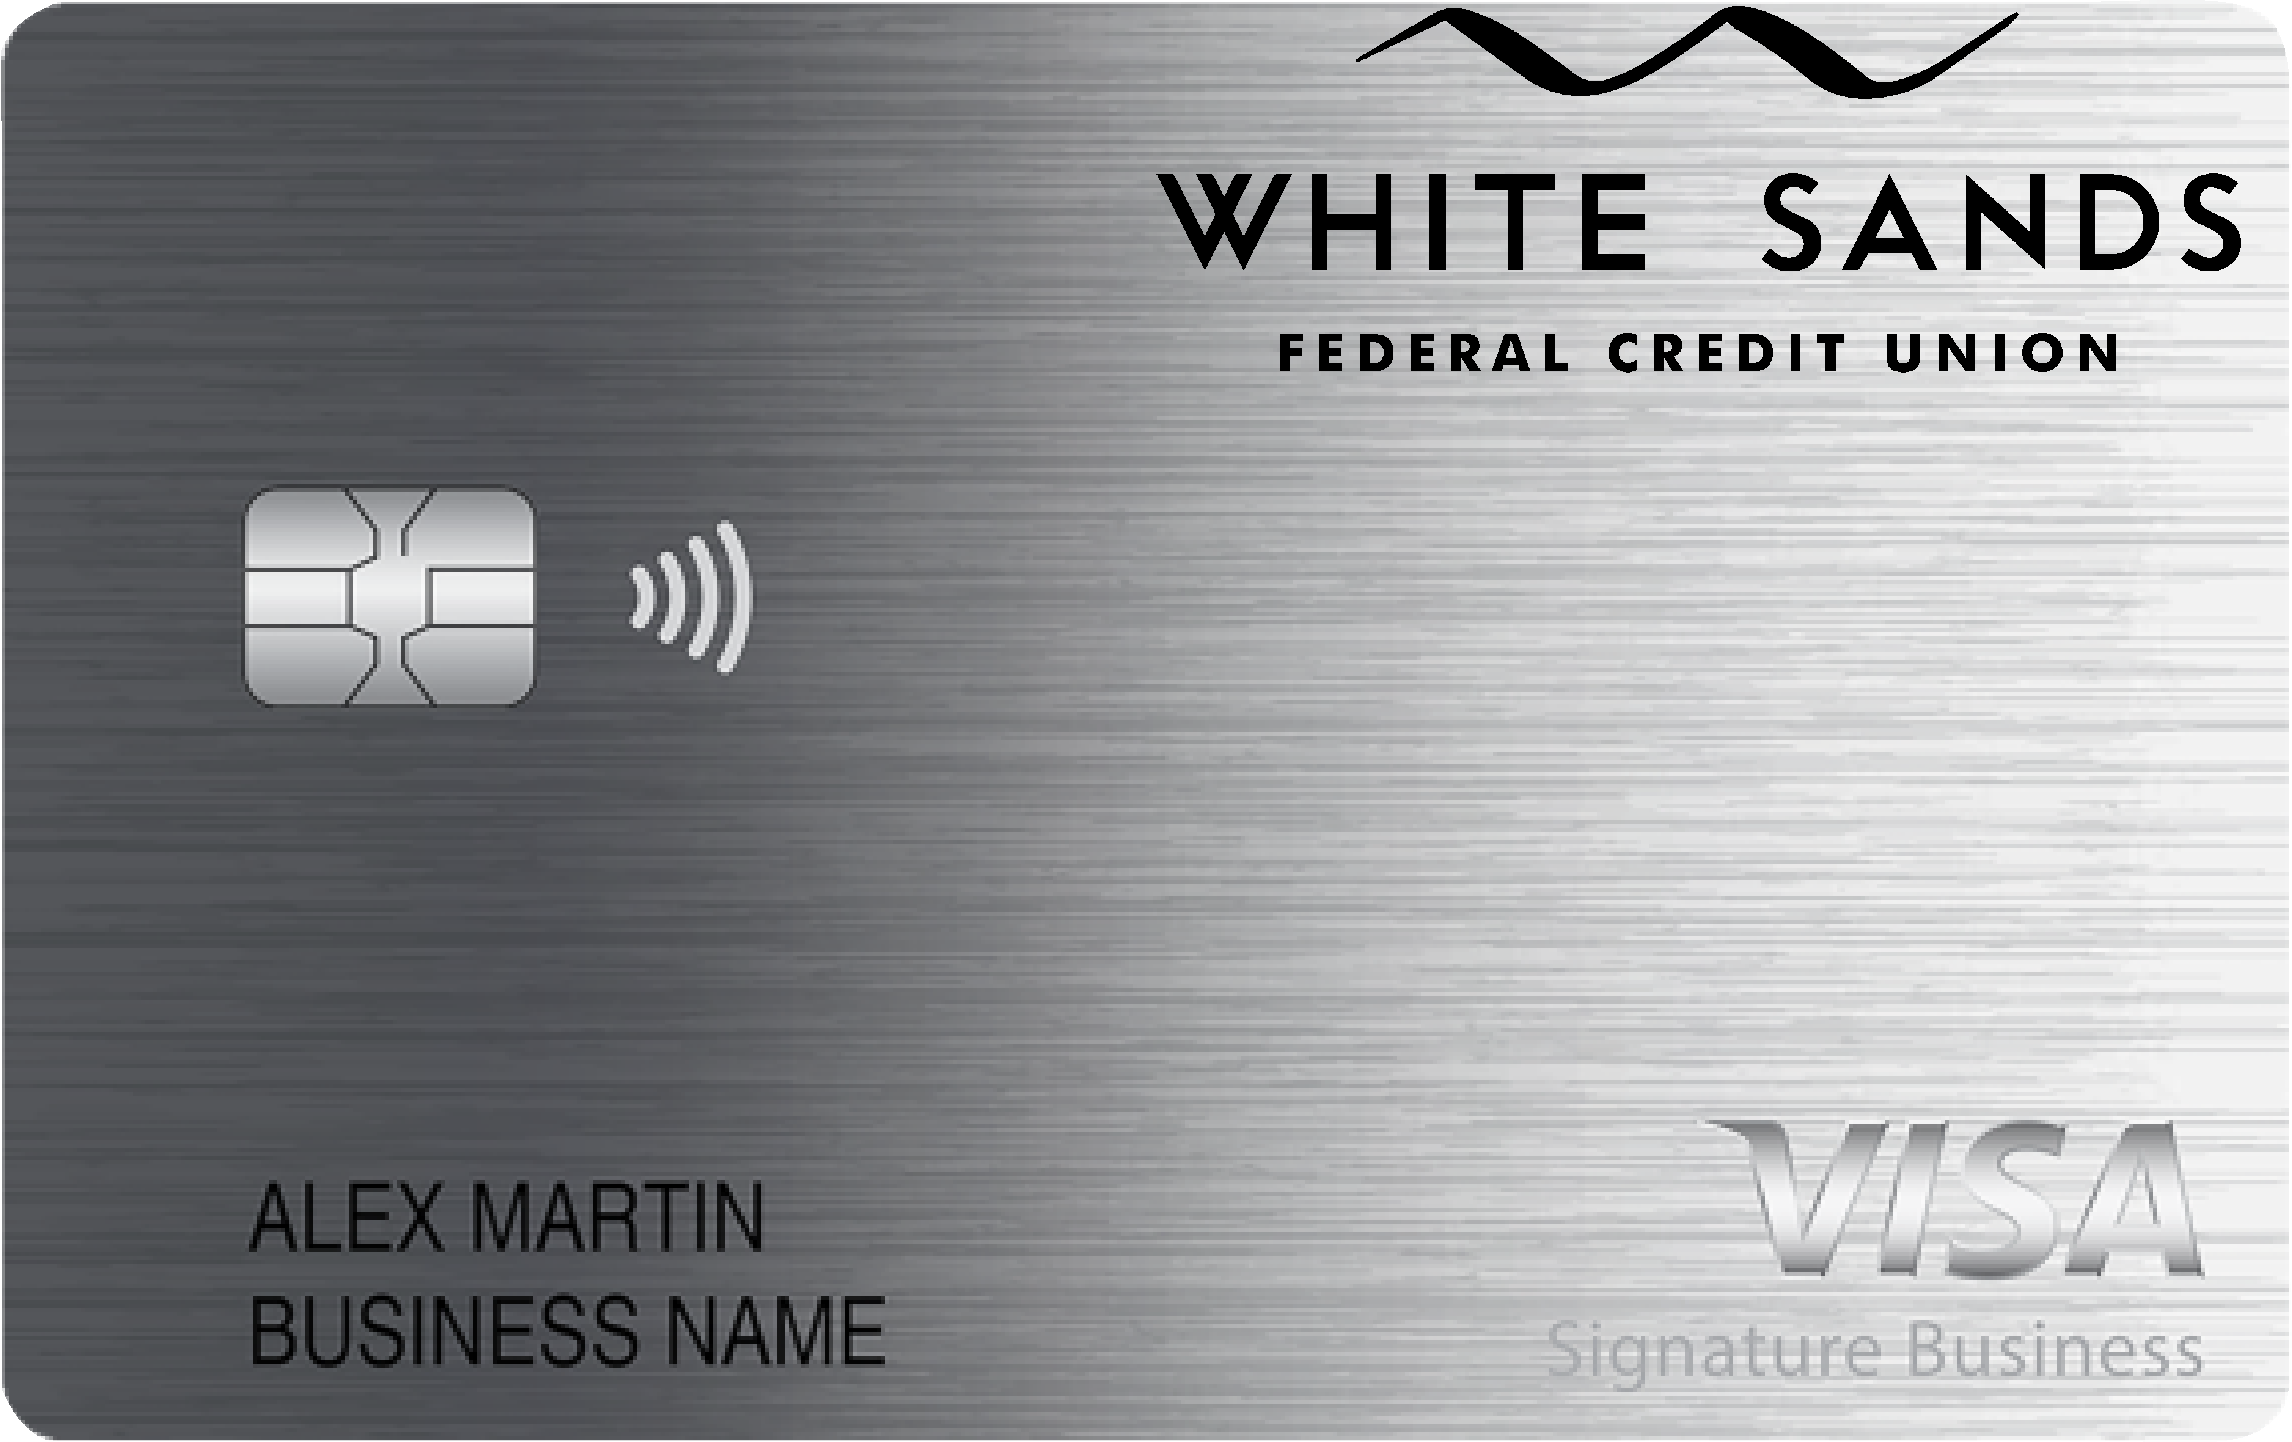 White Sands Federal Credit Union